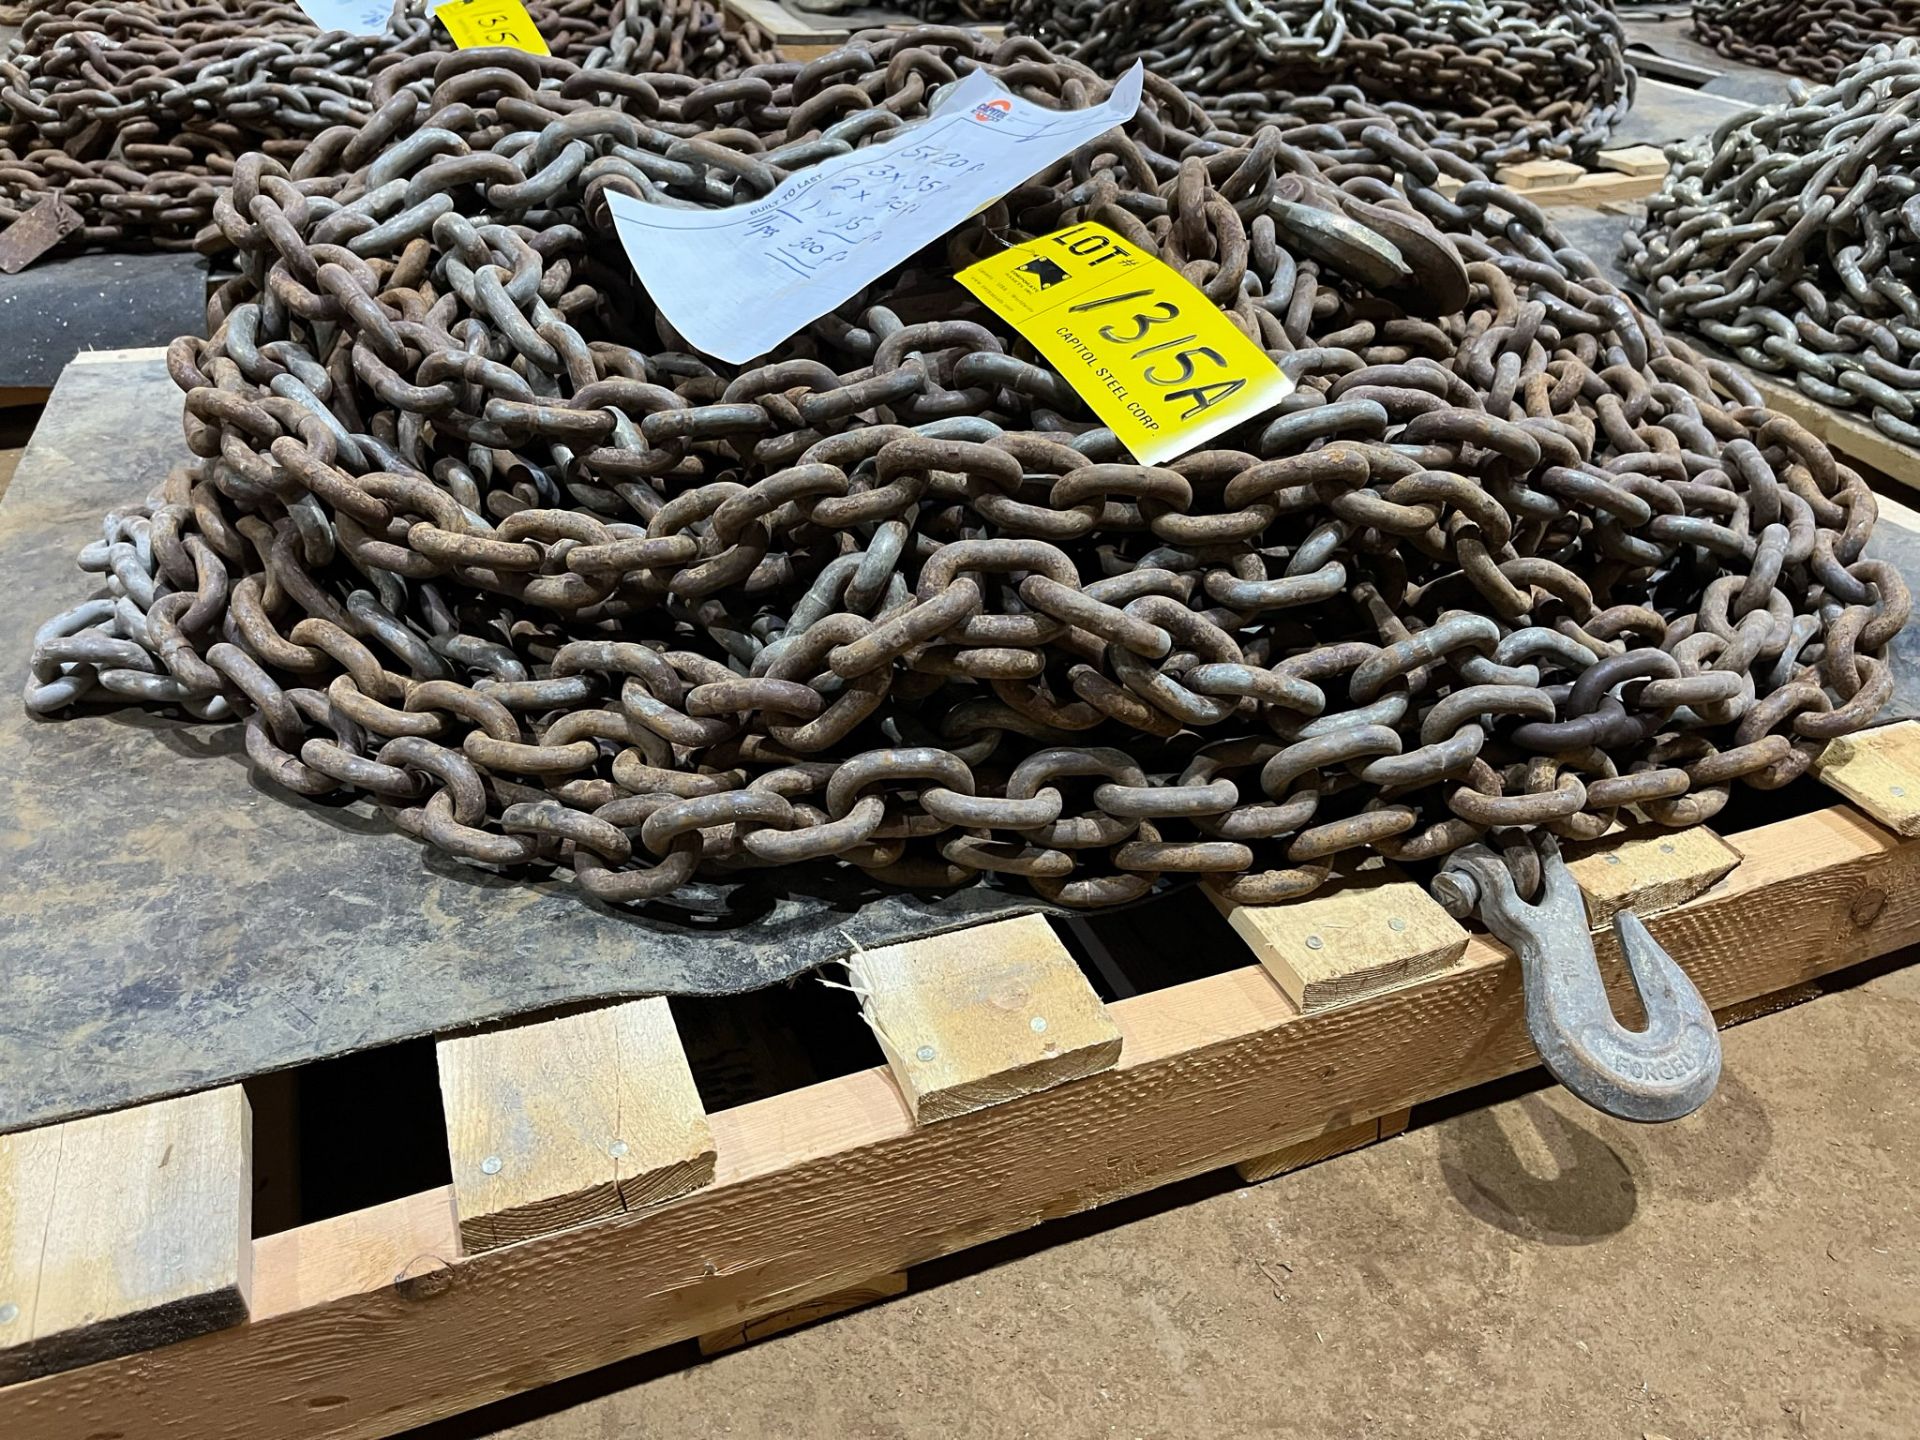 LOT/ SKID OF 300FT, 1/2" TRANSPORT CHAIN - Image 3 of 3